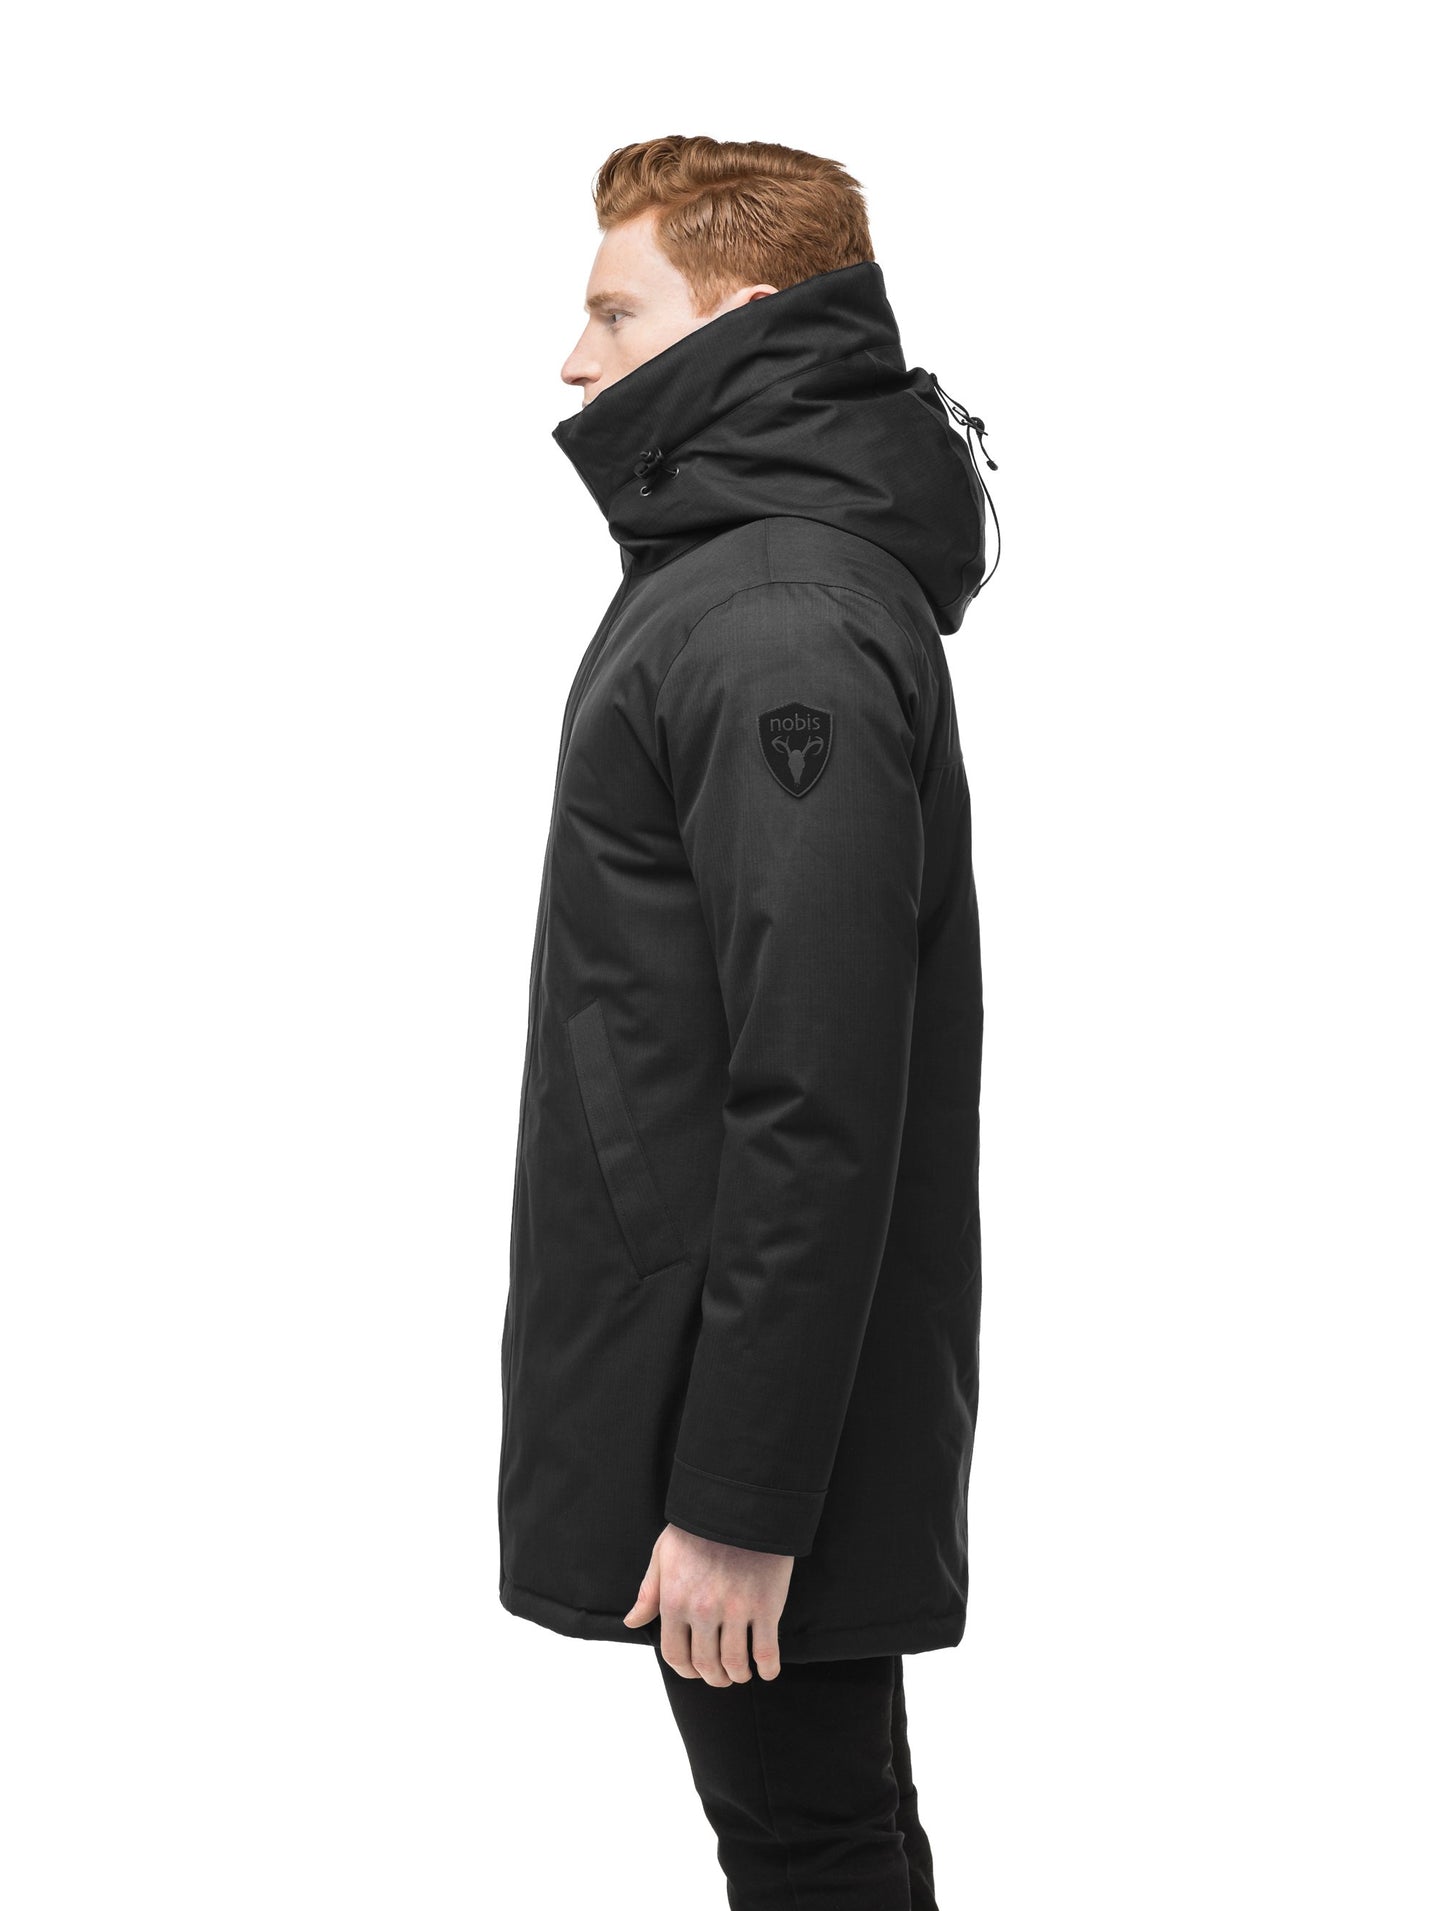 Pierre Men's Jacket in thigh length, Canadian white duck down insulation, non-removable down-filled hood, angled waist pockets, centre-front zipper with wind flap, and elastic ribbed cuffs, in CH Black